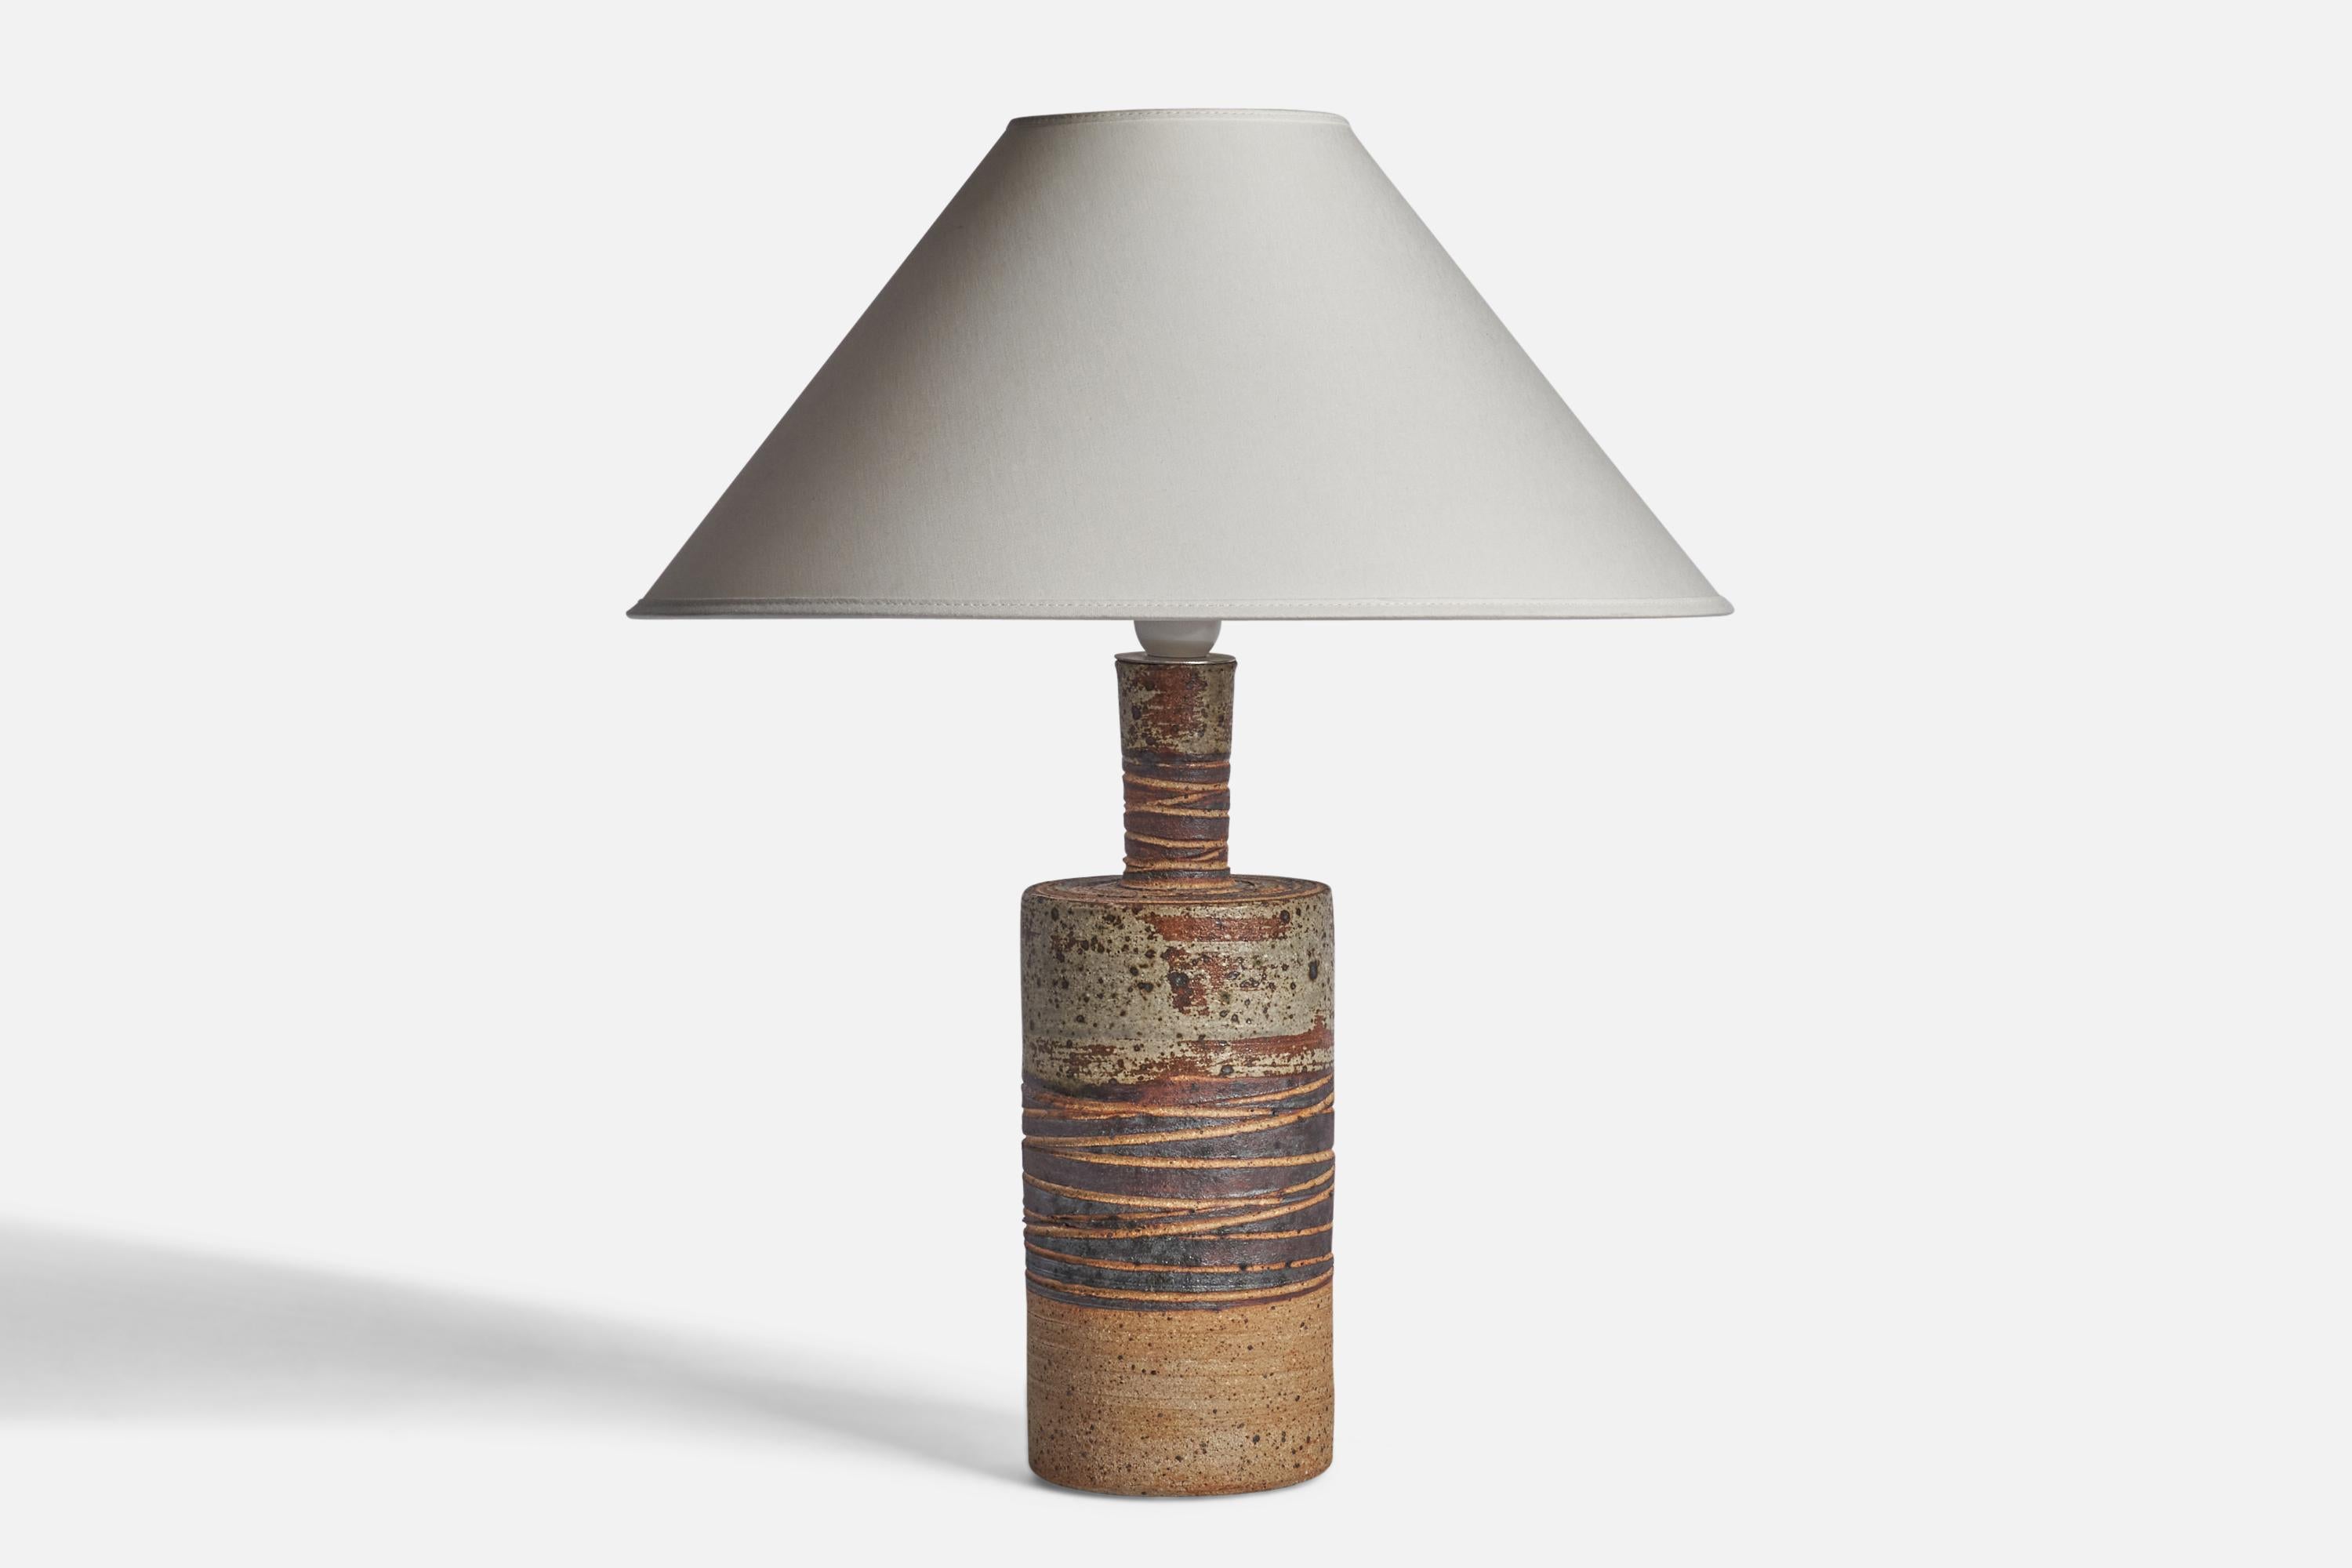 A grey and brown-glazed stoneware table lamp designed and produced by Tue Poulsen, Sweden, 1960s.

Dimensions of Lamp (inches): 14.7” H x 4.45